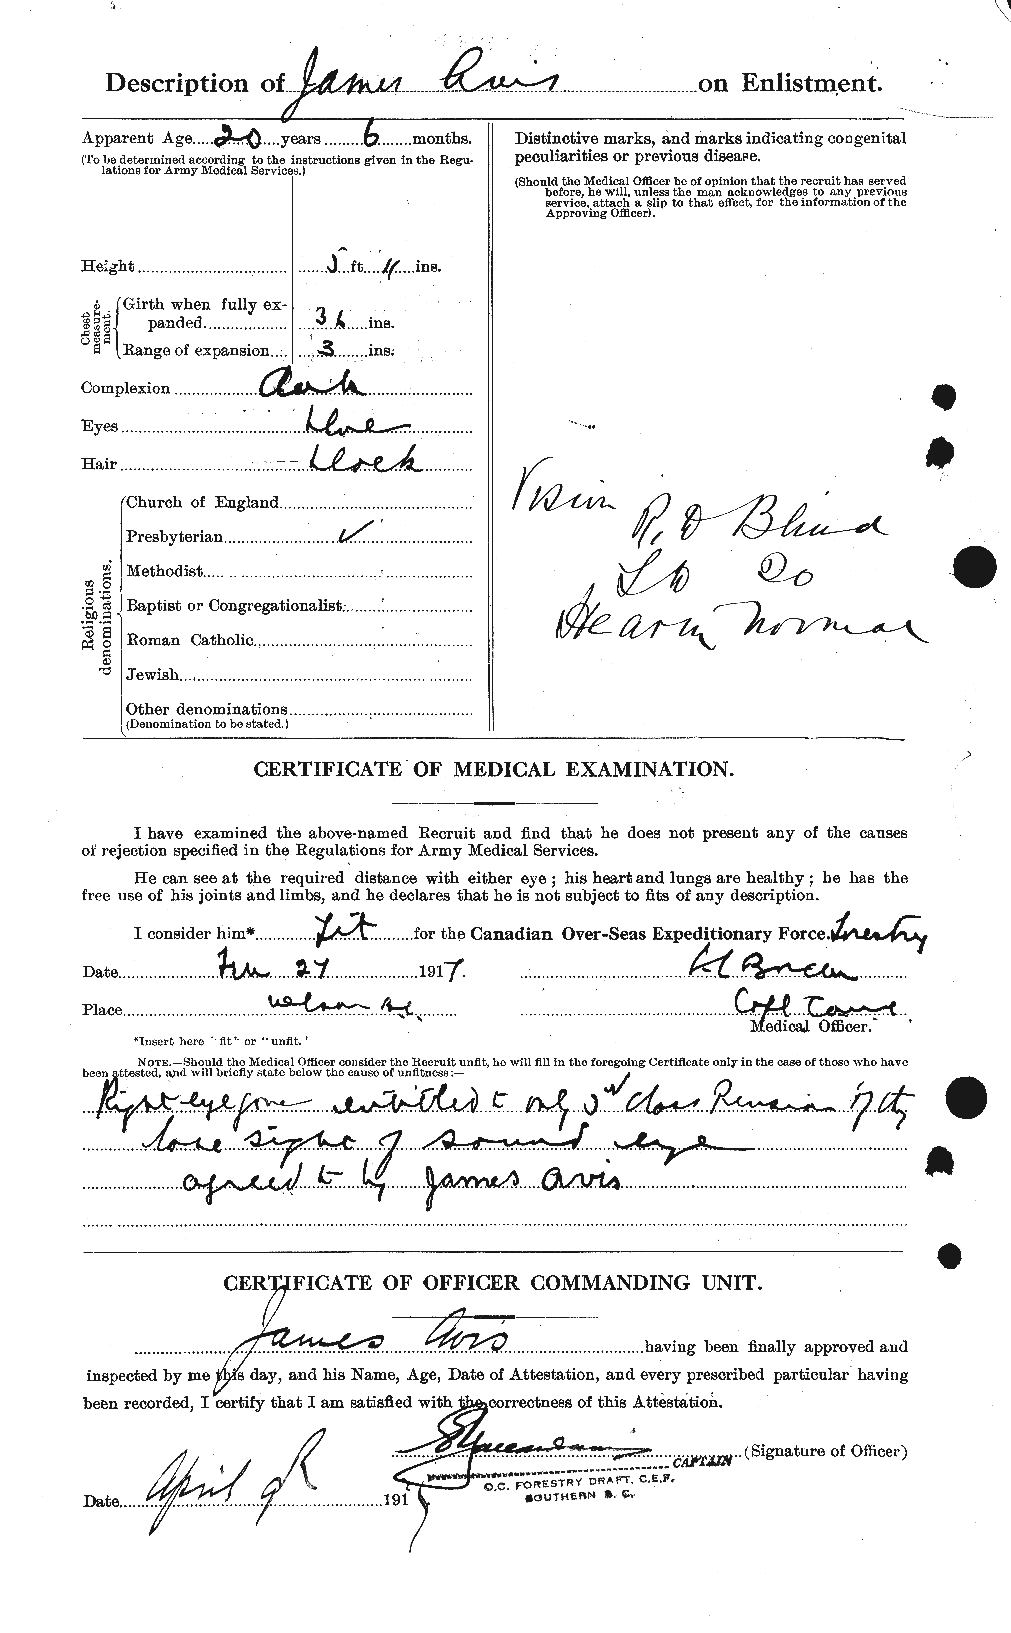 Personnel Records of the First World War - CEF 215998b